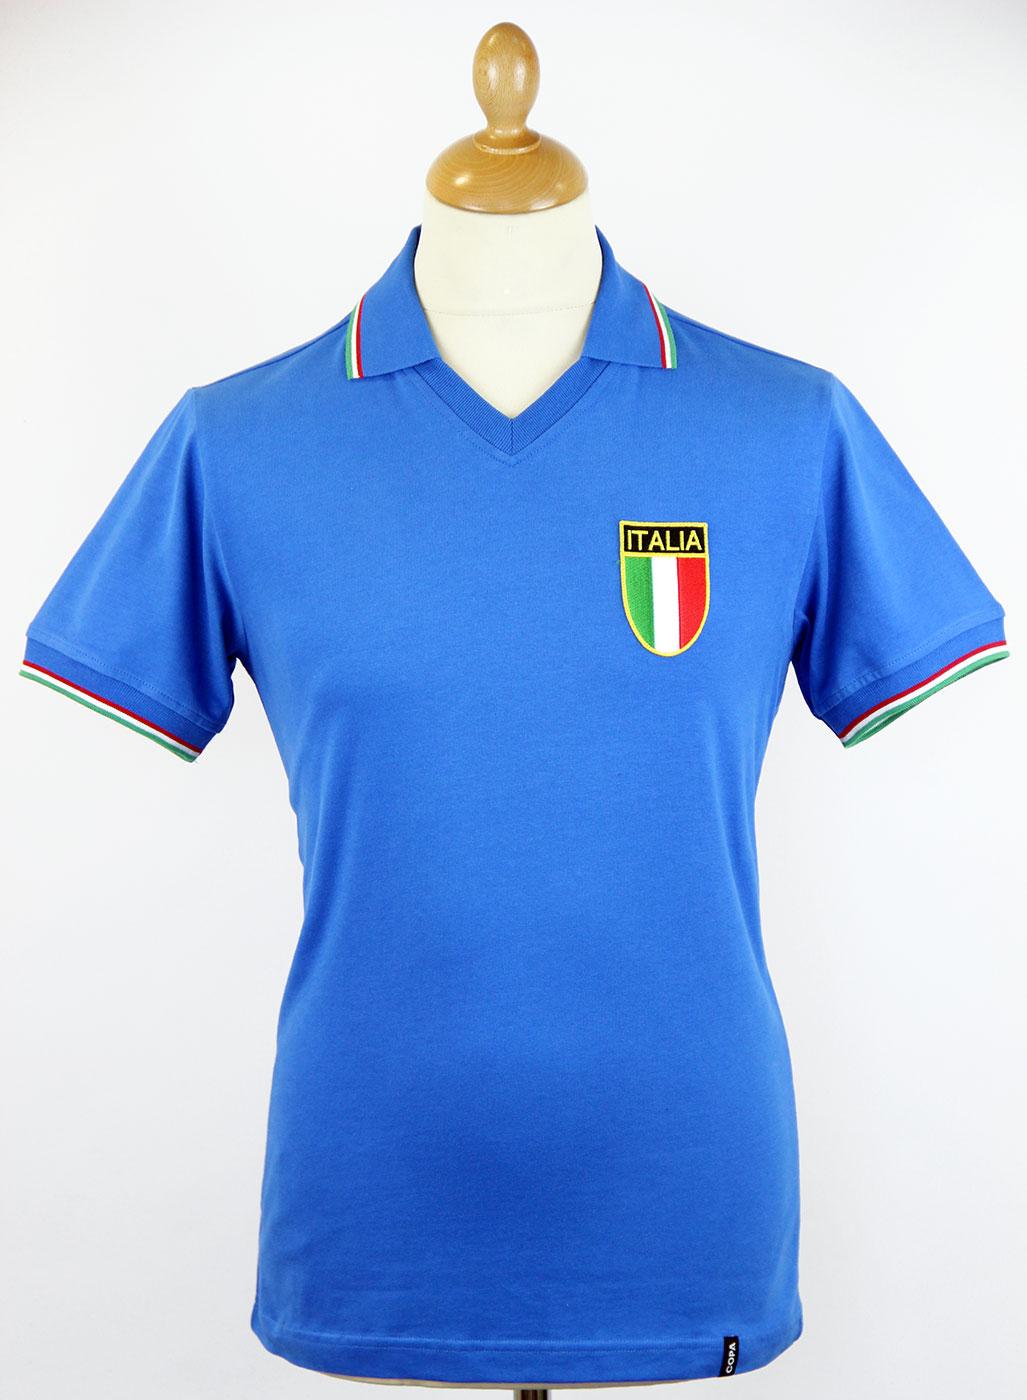 Italy COPA Retro 1982 World Cup Indie Football Top